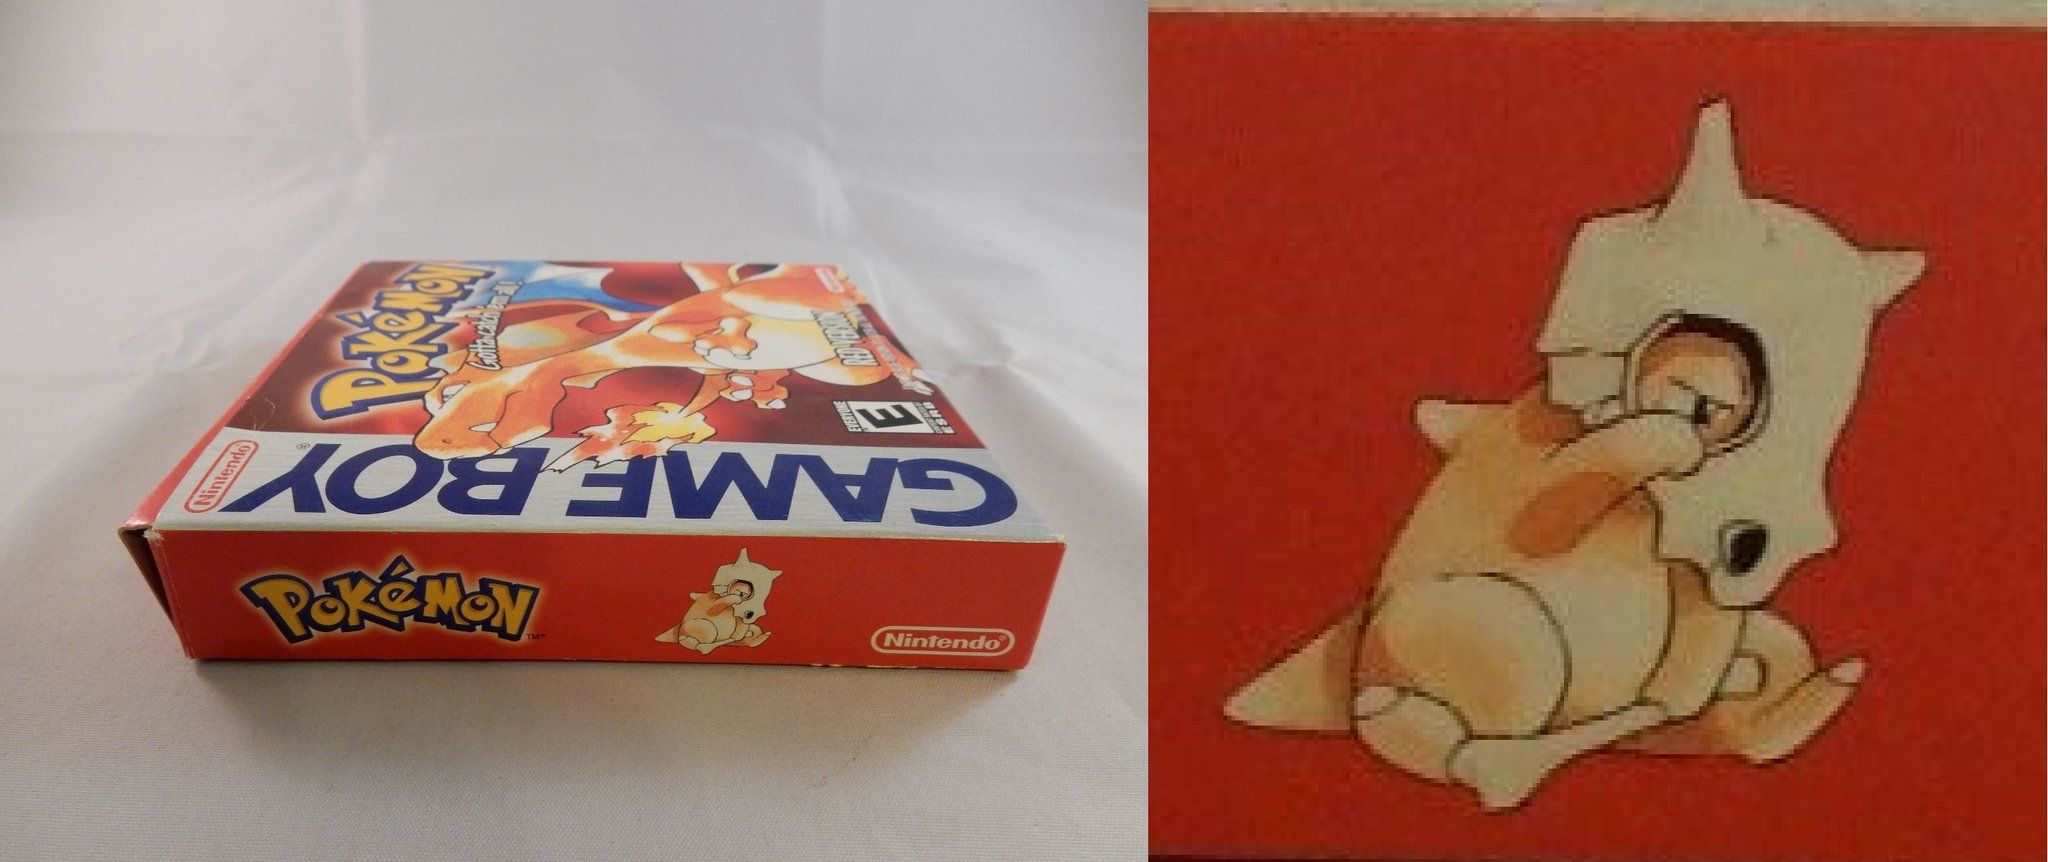 Pokemon Company thought it'd help drive up sales to put a crying orphan on the side of the box.